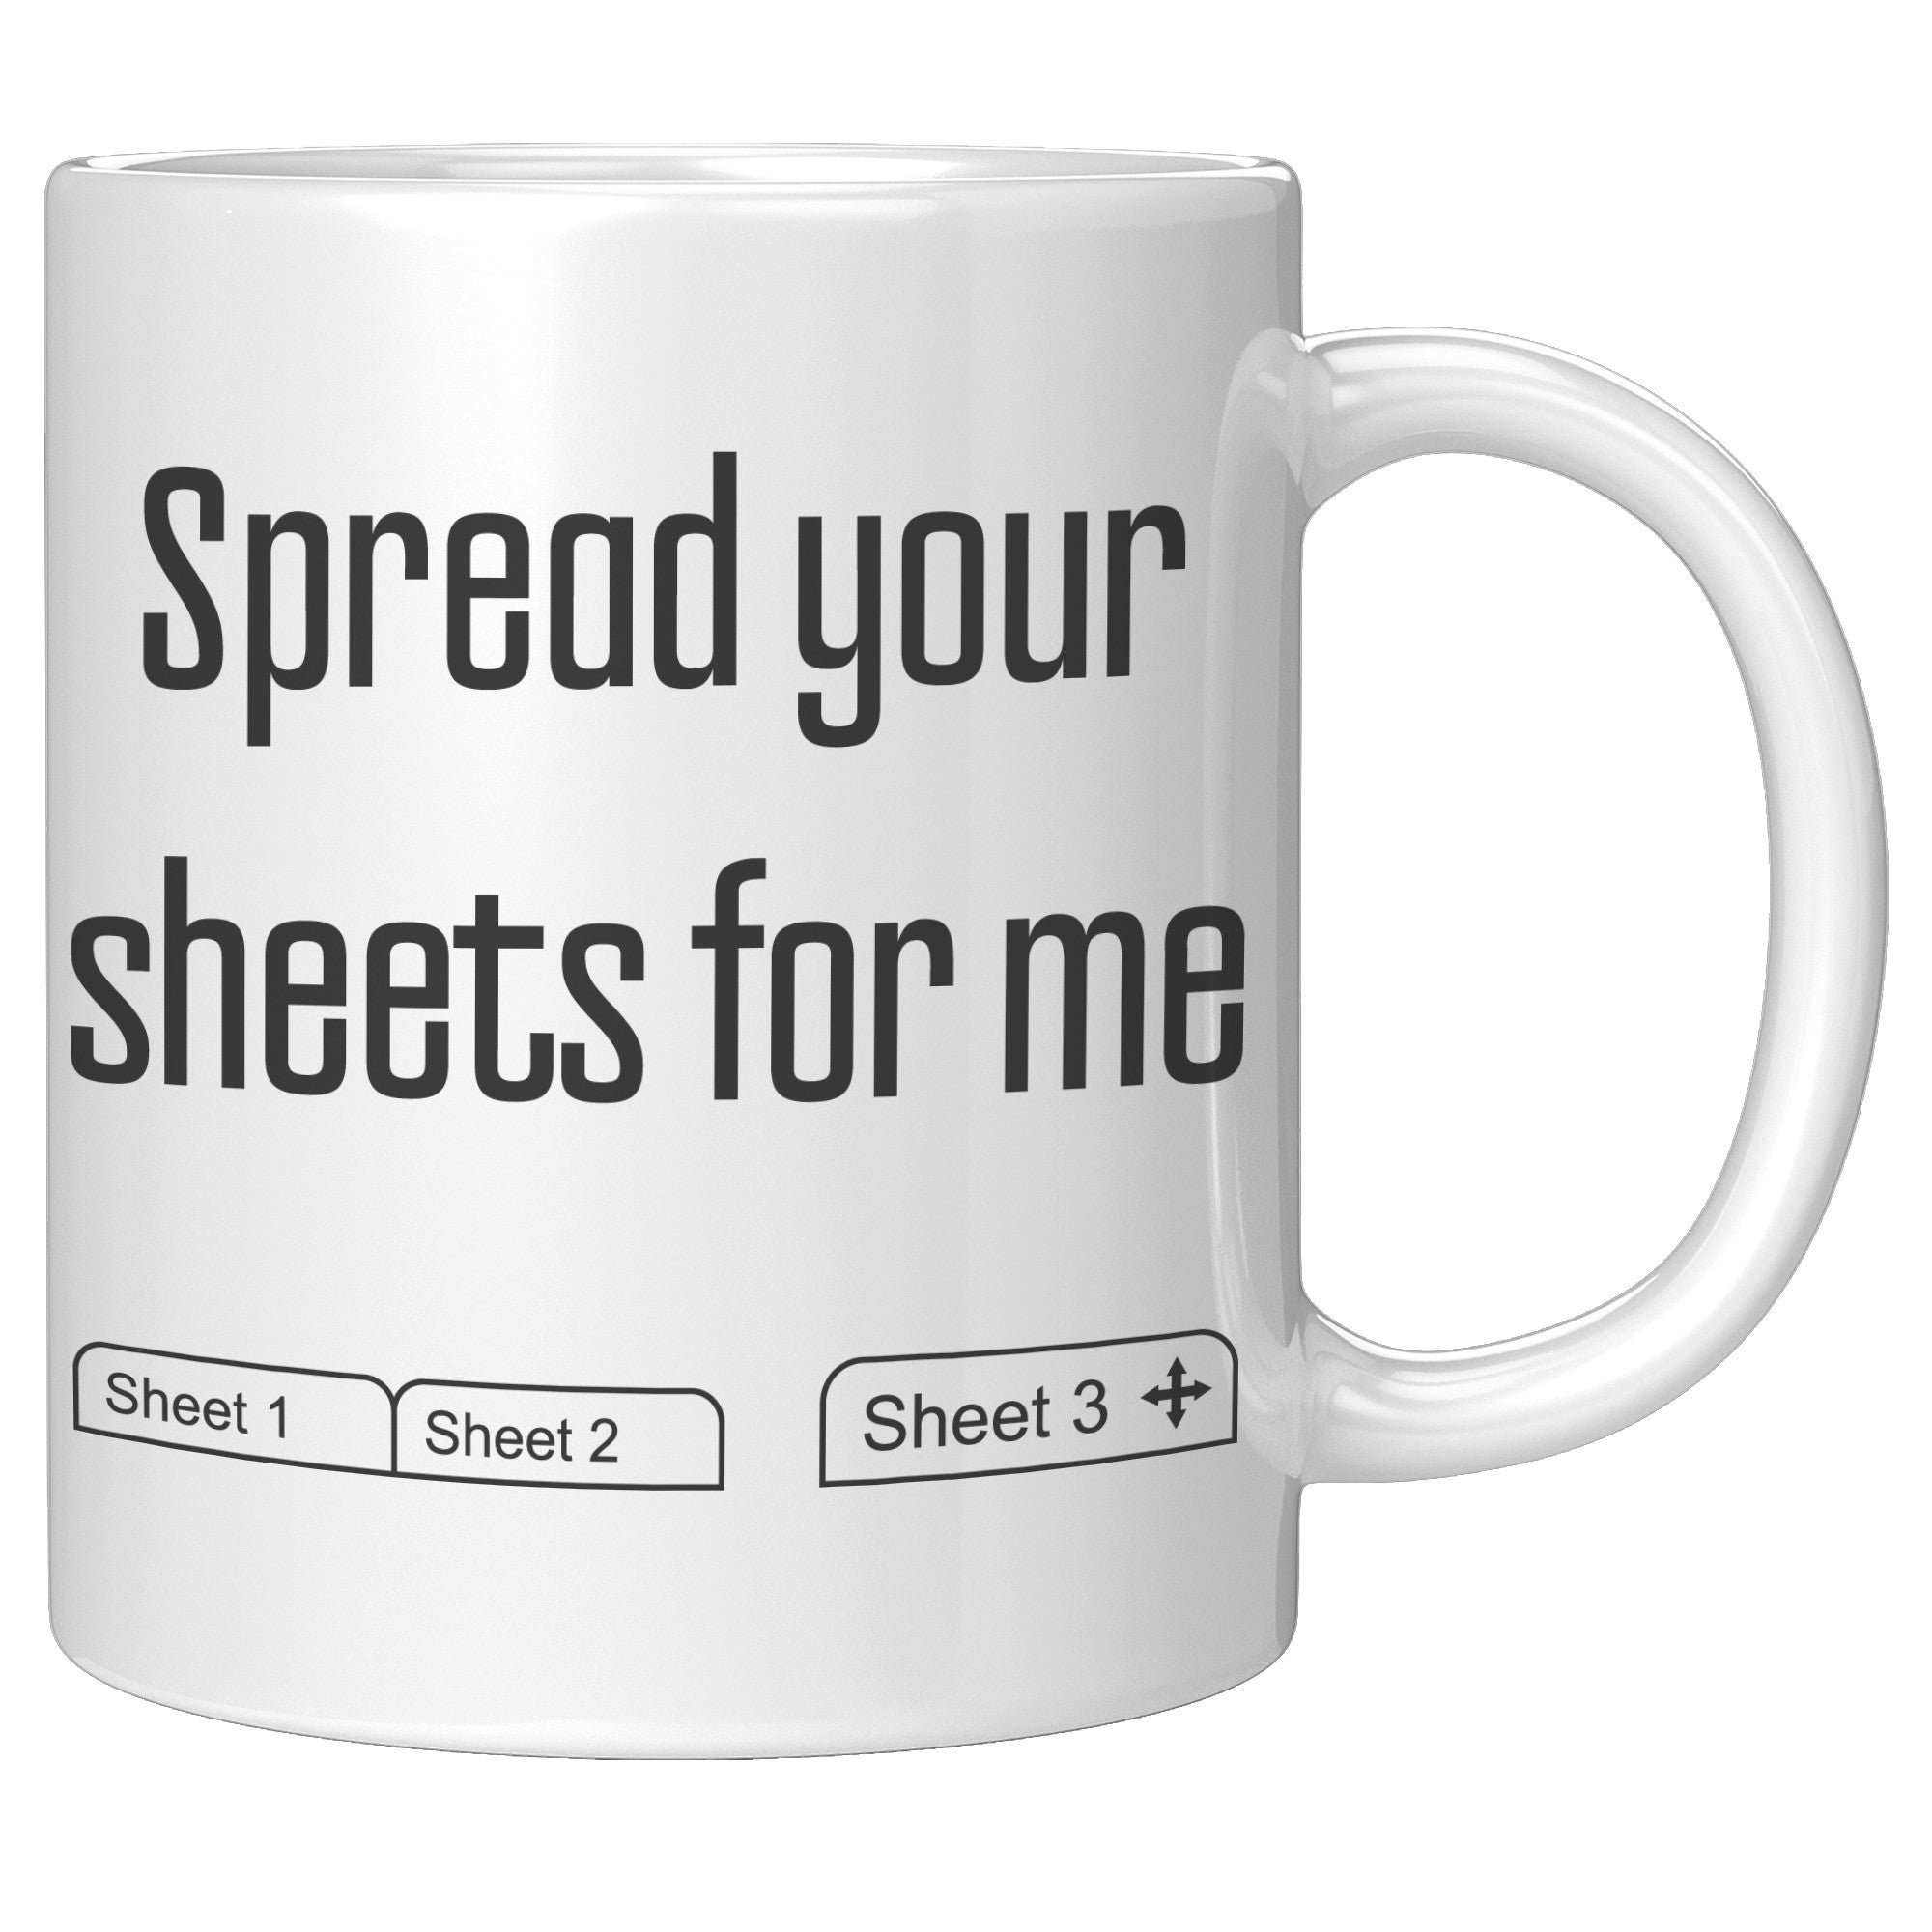 Spread Your Sheets For Me Mug